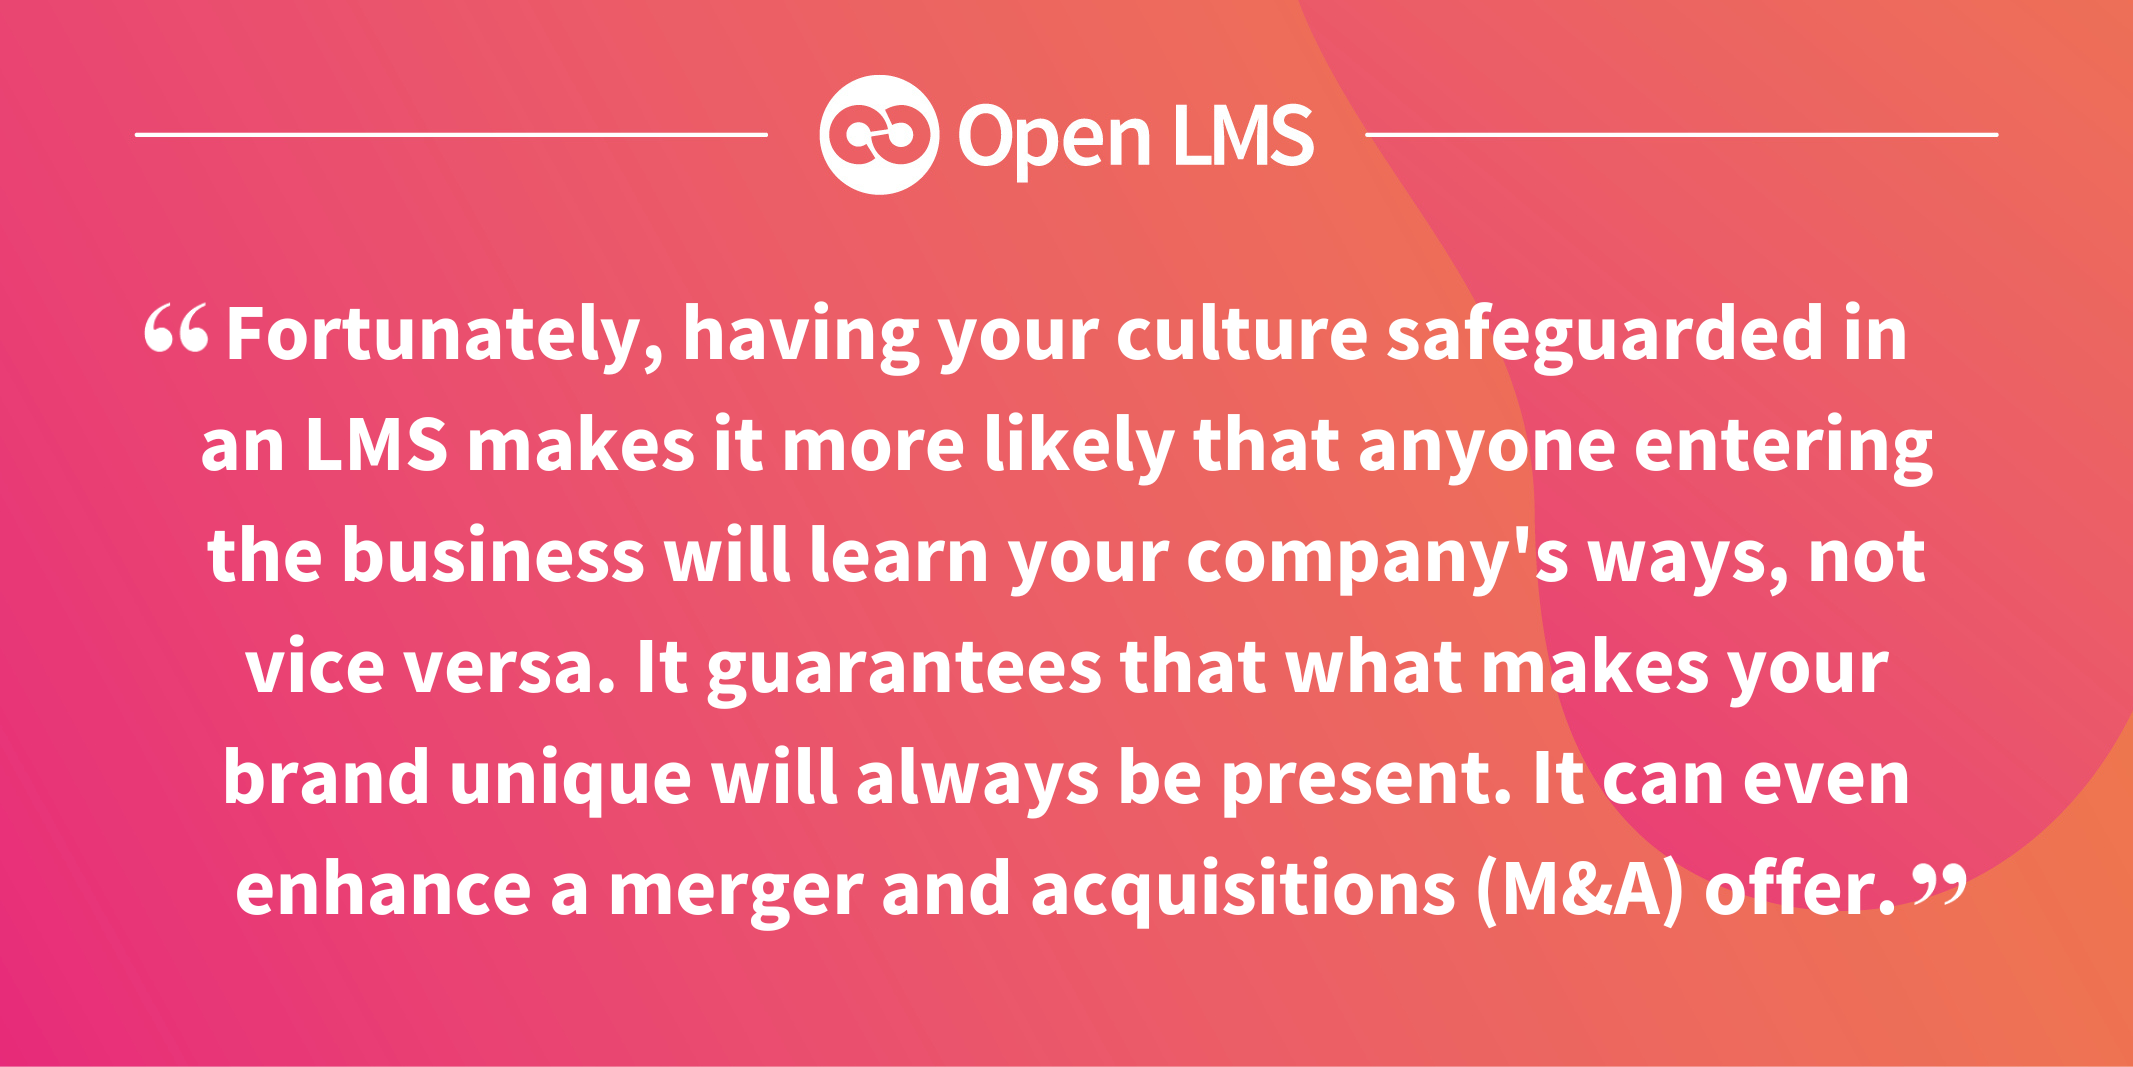 Fortunately, having your culture safeguarded in an LMS makes it more likely that anyone entering the business will learn your company's ways, not vice versa. It guarantees that what makes your brand unique will always be present. It can even enhance a merger and acquisitions (M&A) offer.”